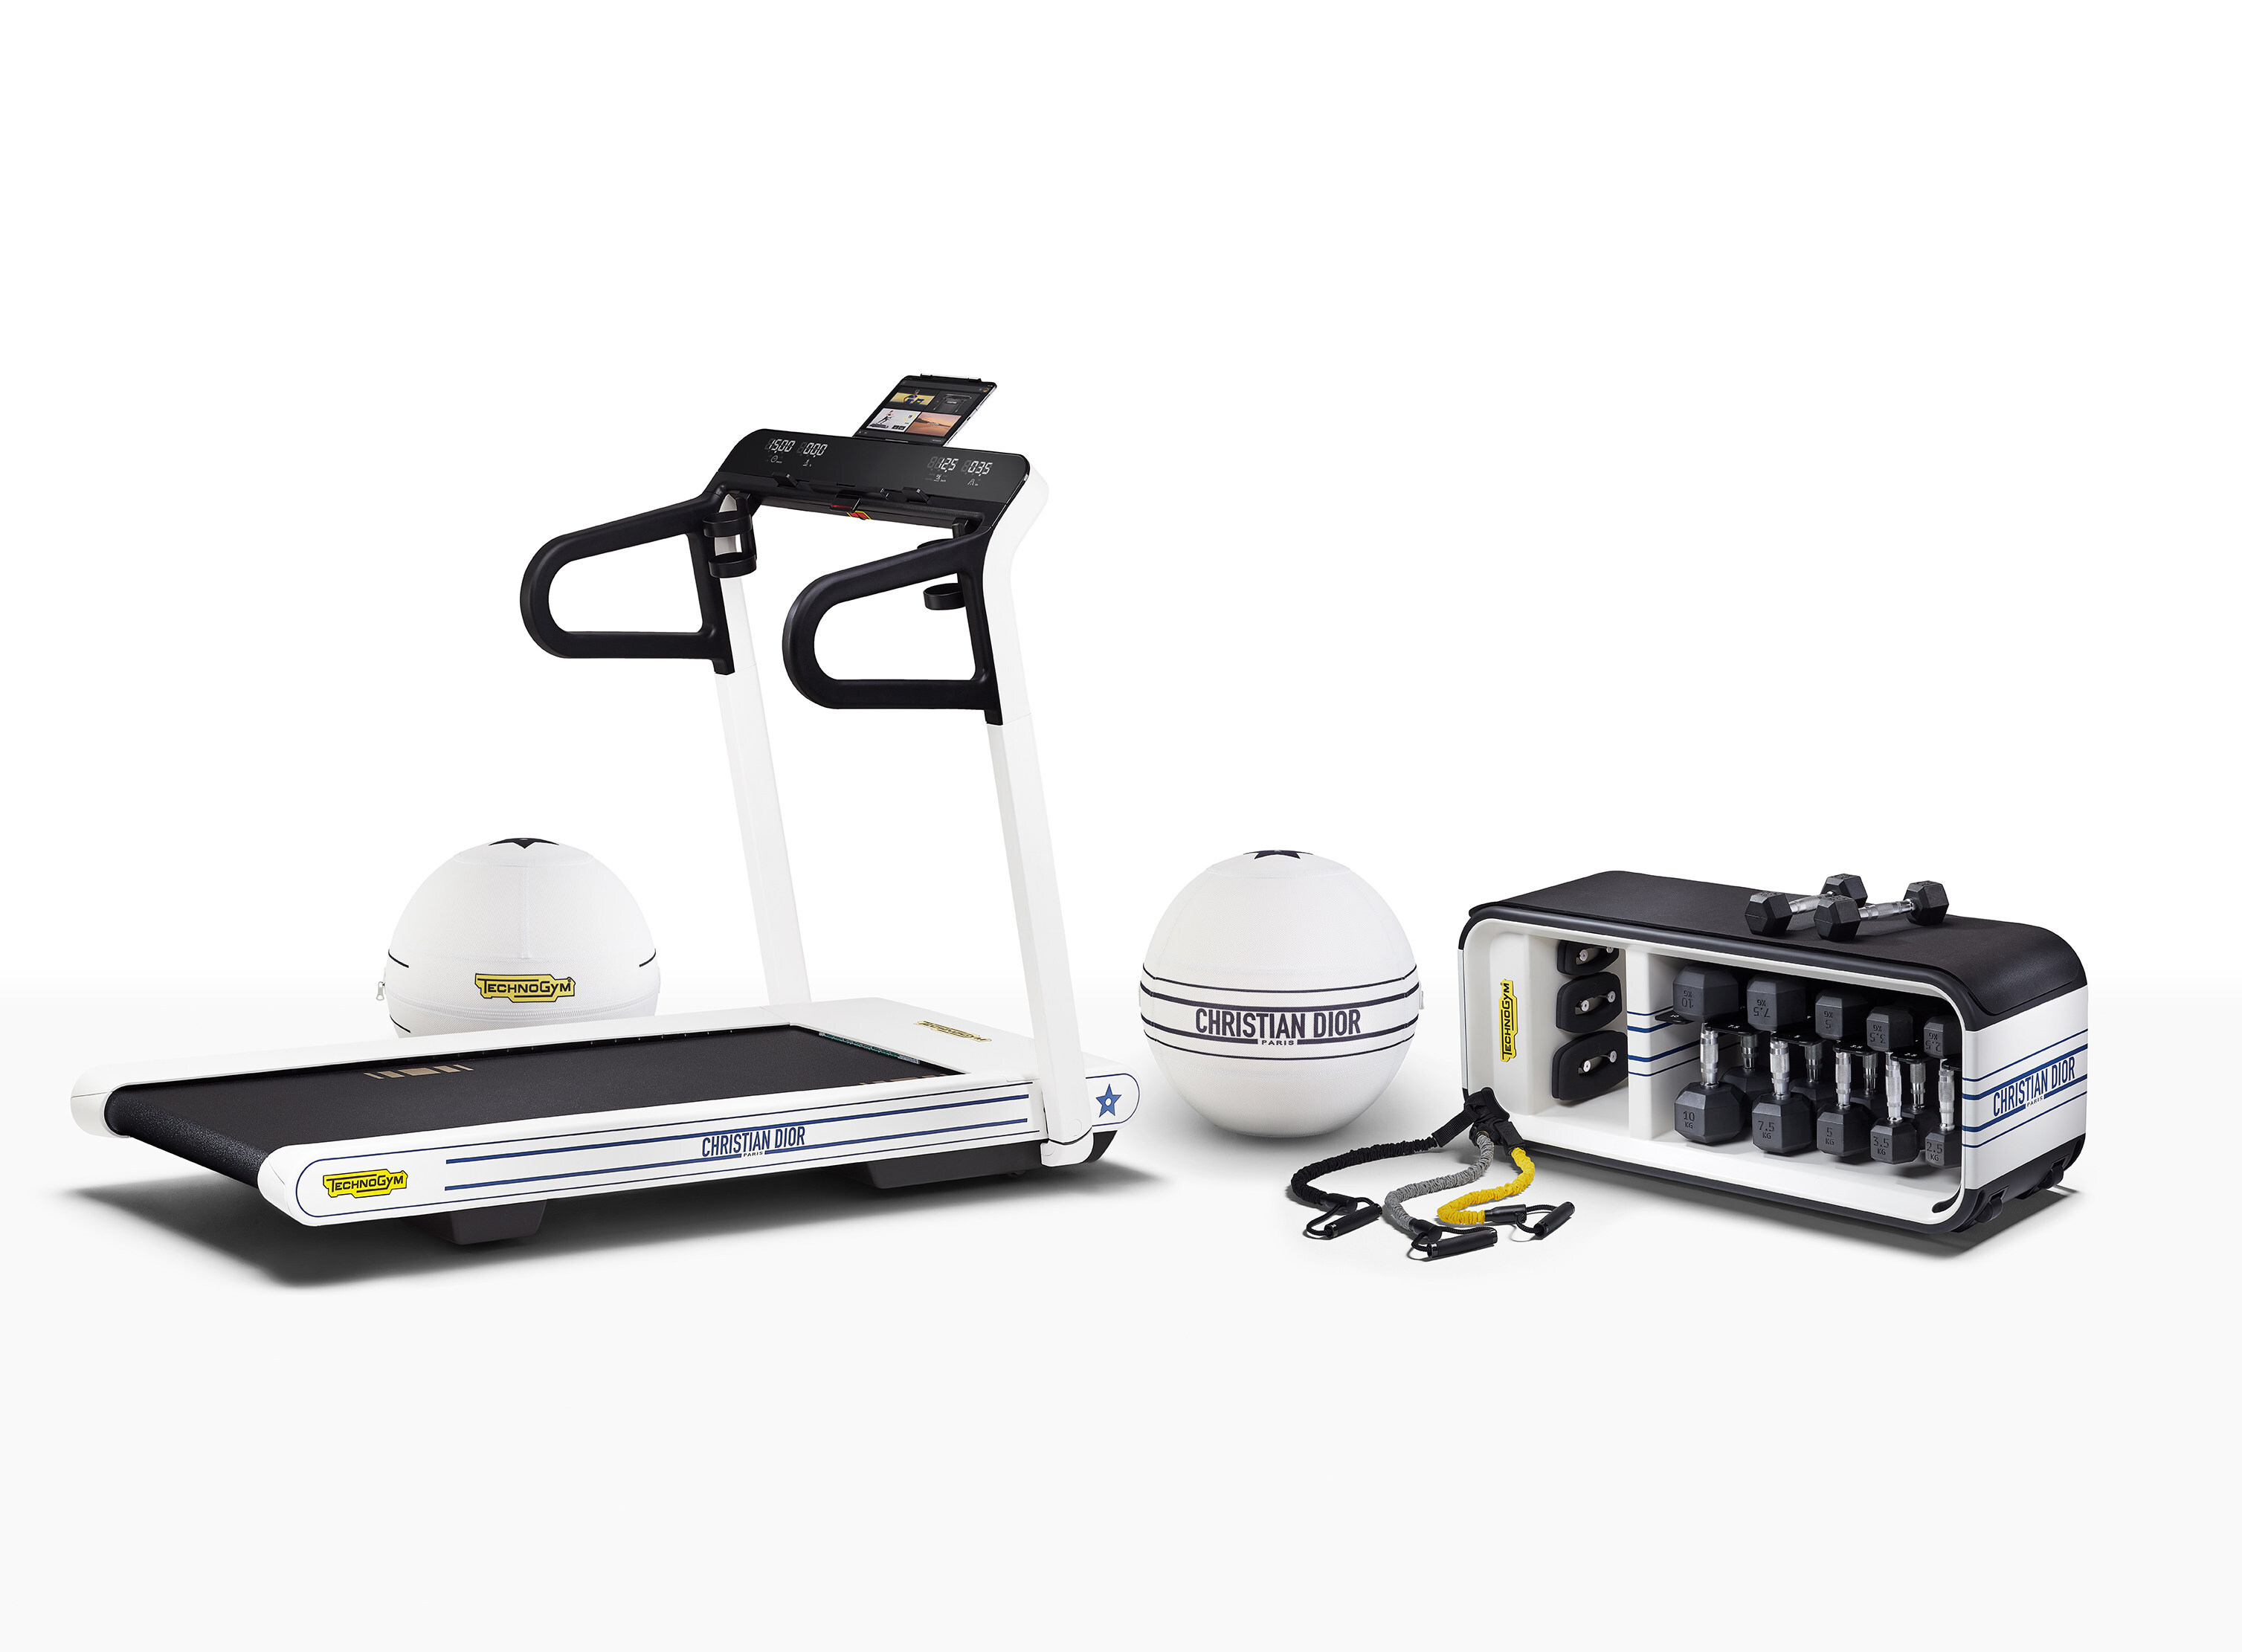 Work out at home in style with Dior’s Technogym. Photo: Handout